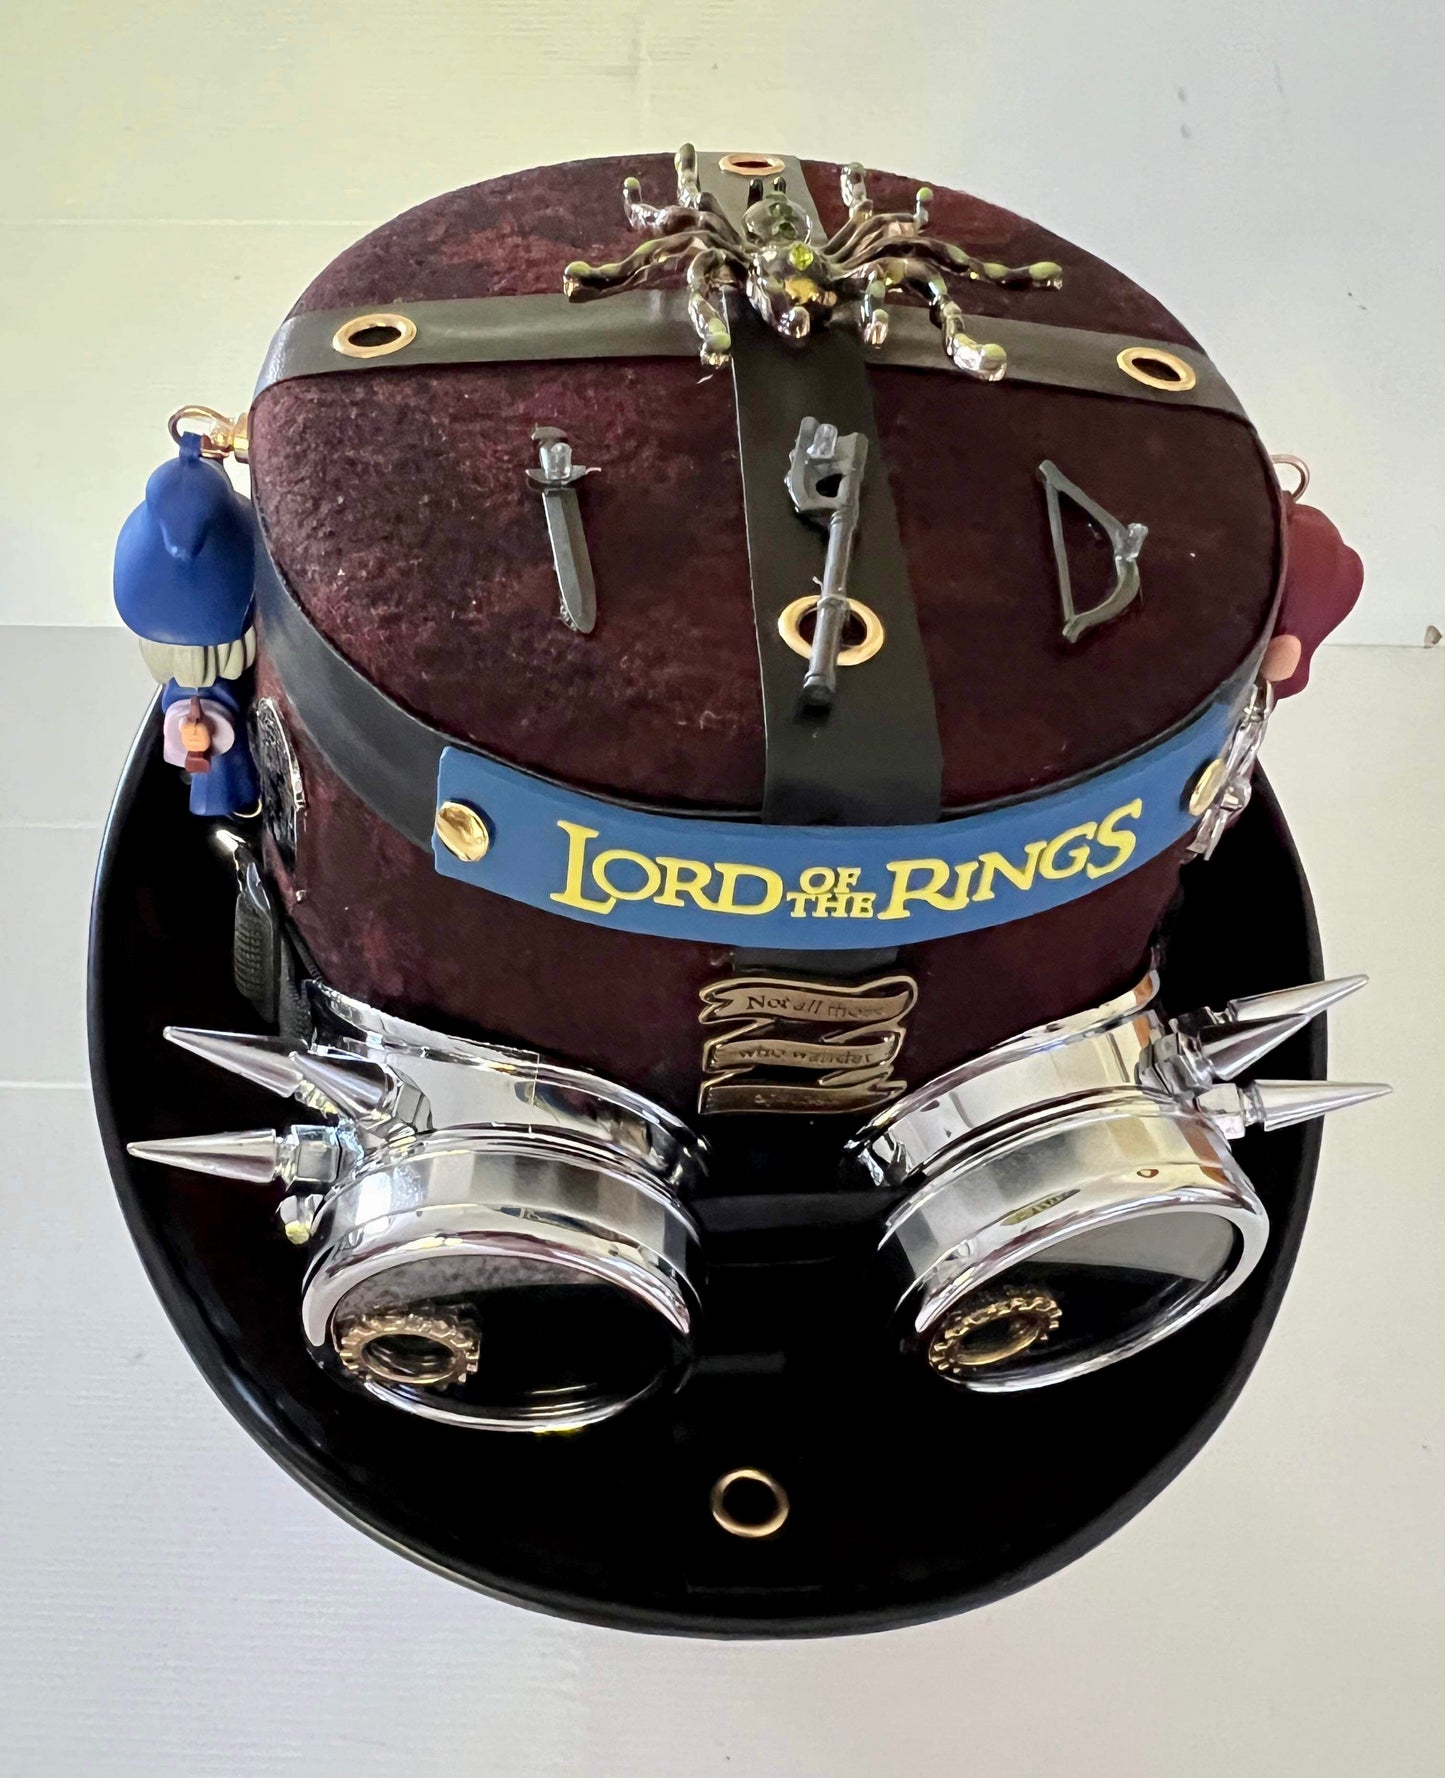 Steampunk Style Hat (Lord of the Rings Theme) with Goggles (Item #418)